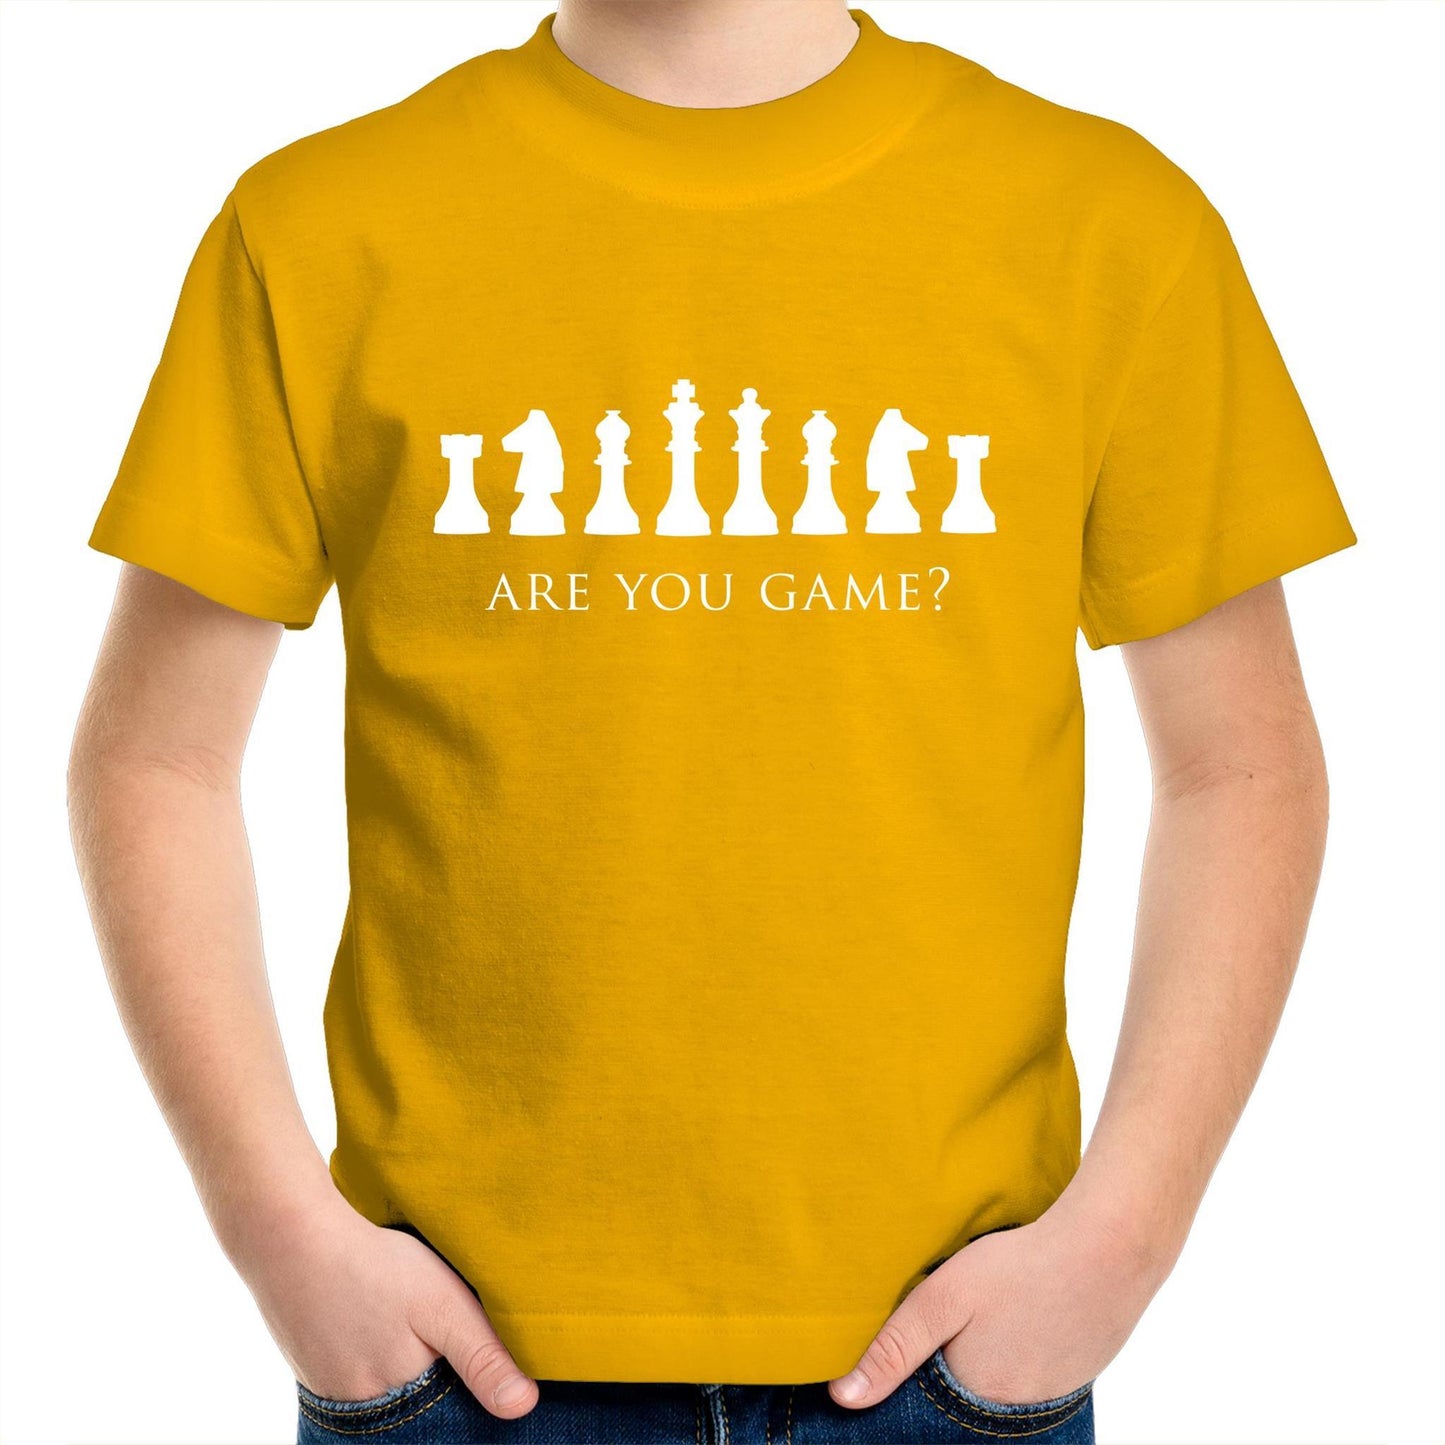 Are You Game - Kids Youth Crew T-shirt Gold Kids Youth T-shirt Chess